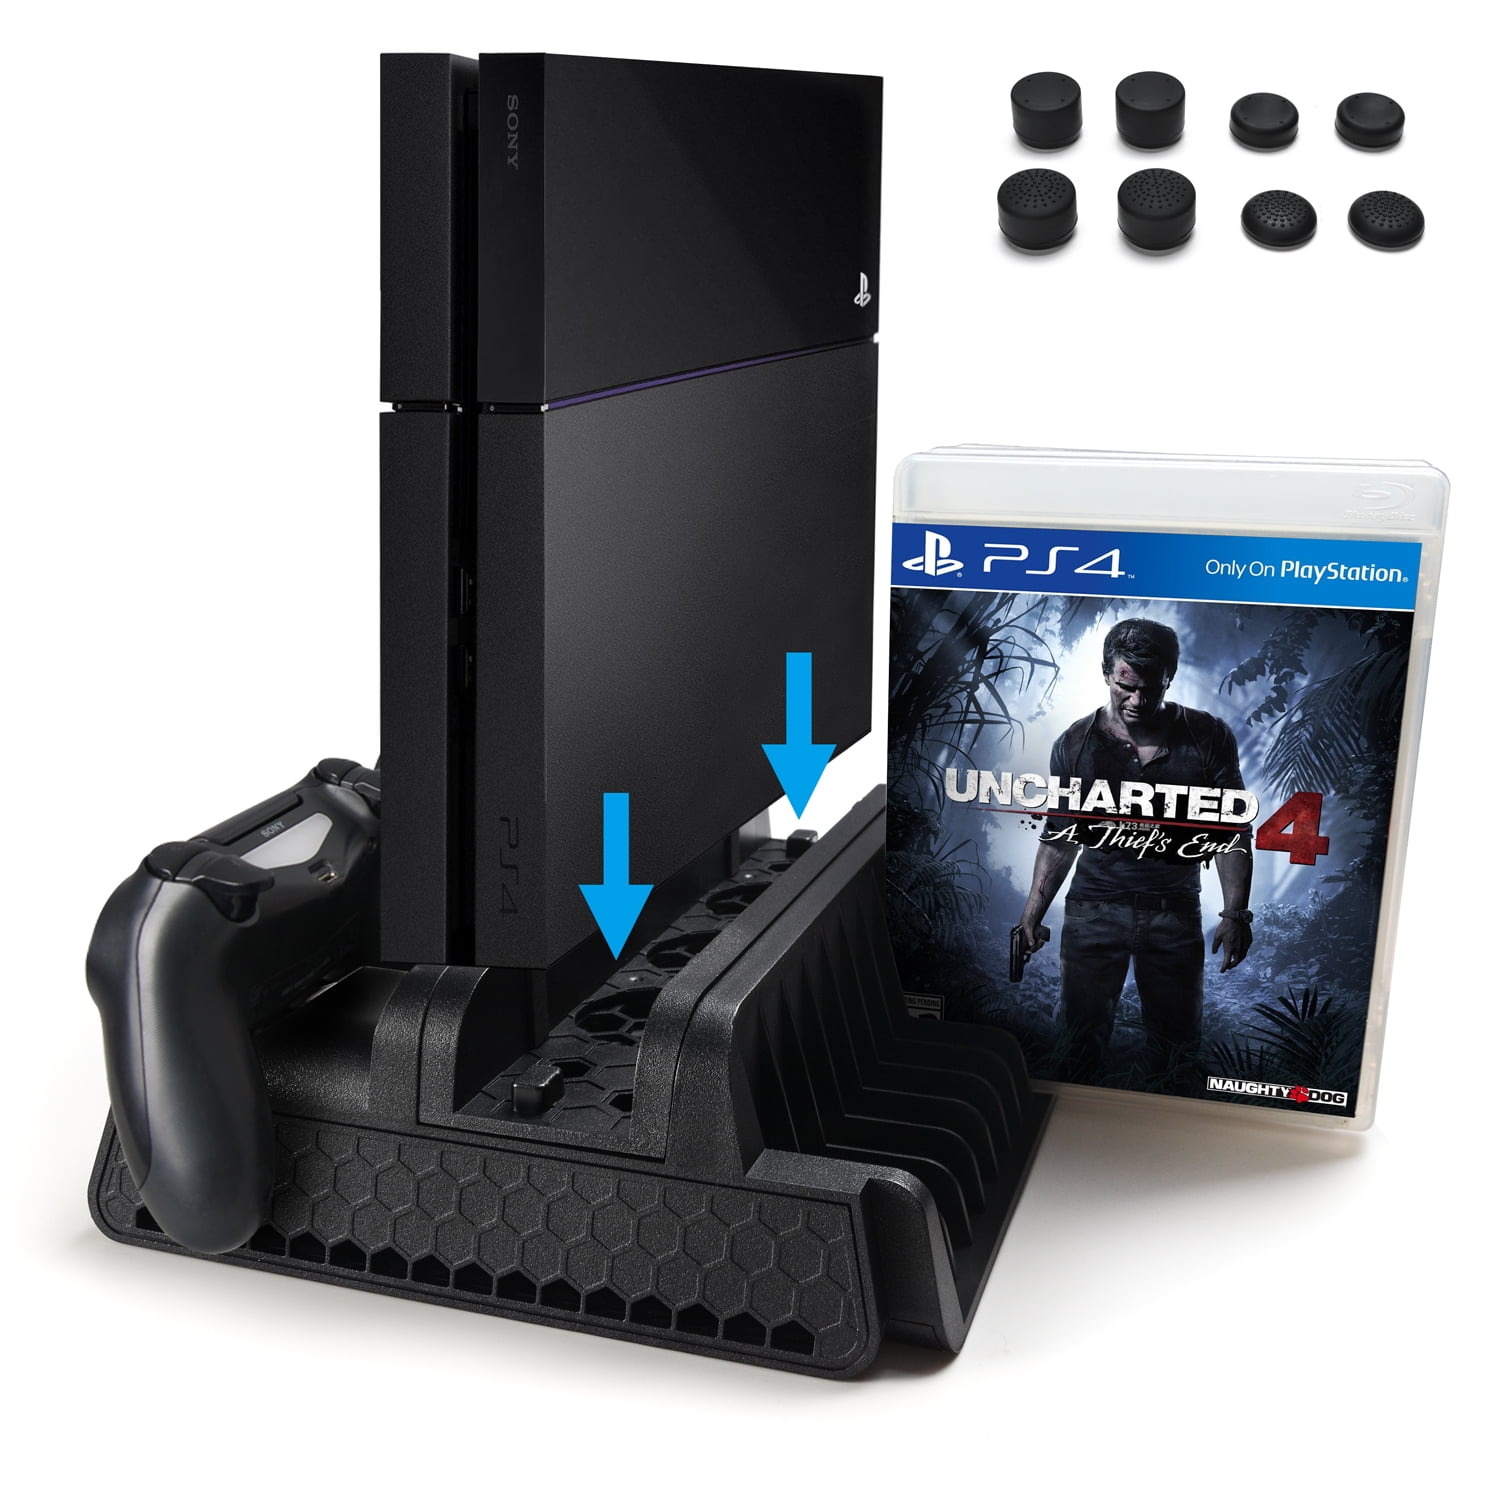  Yanfider Vertical Stand for PS4 Built-in Cooling Vents